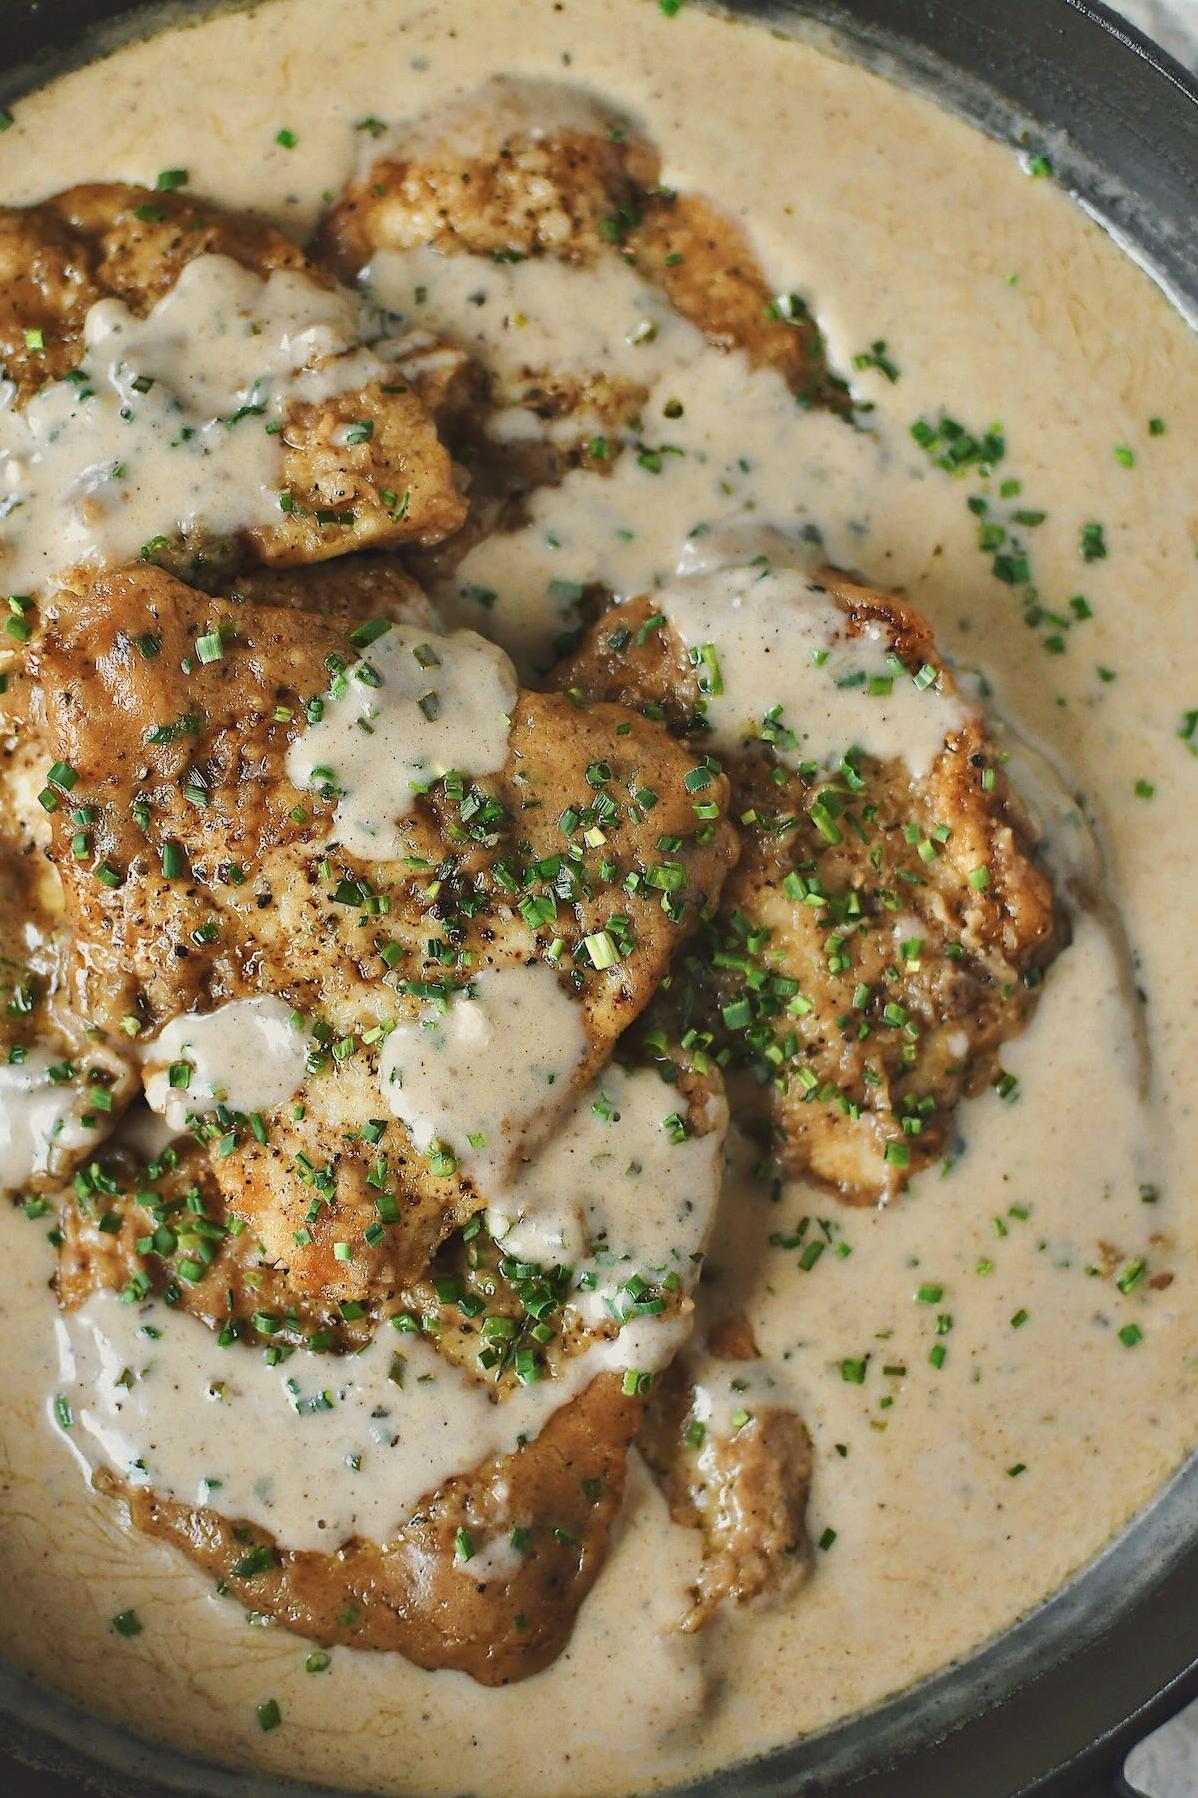  Juicy, tender chicken in a rich and velvety sauce.